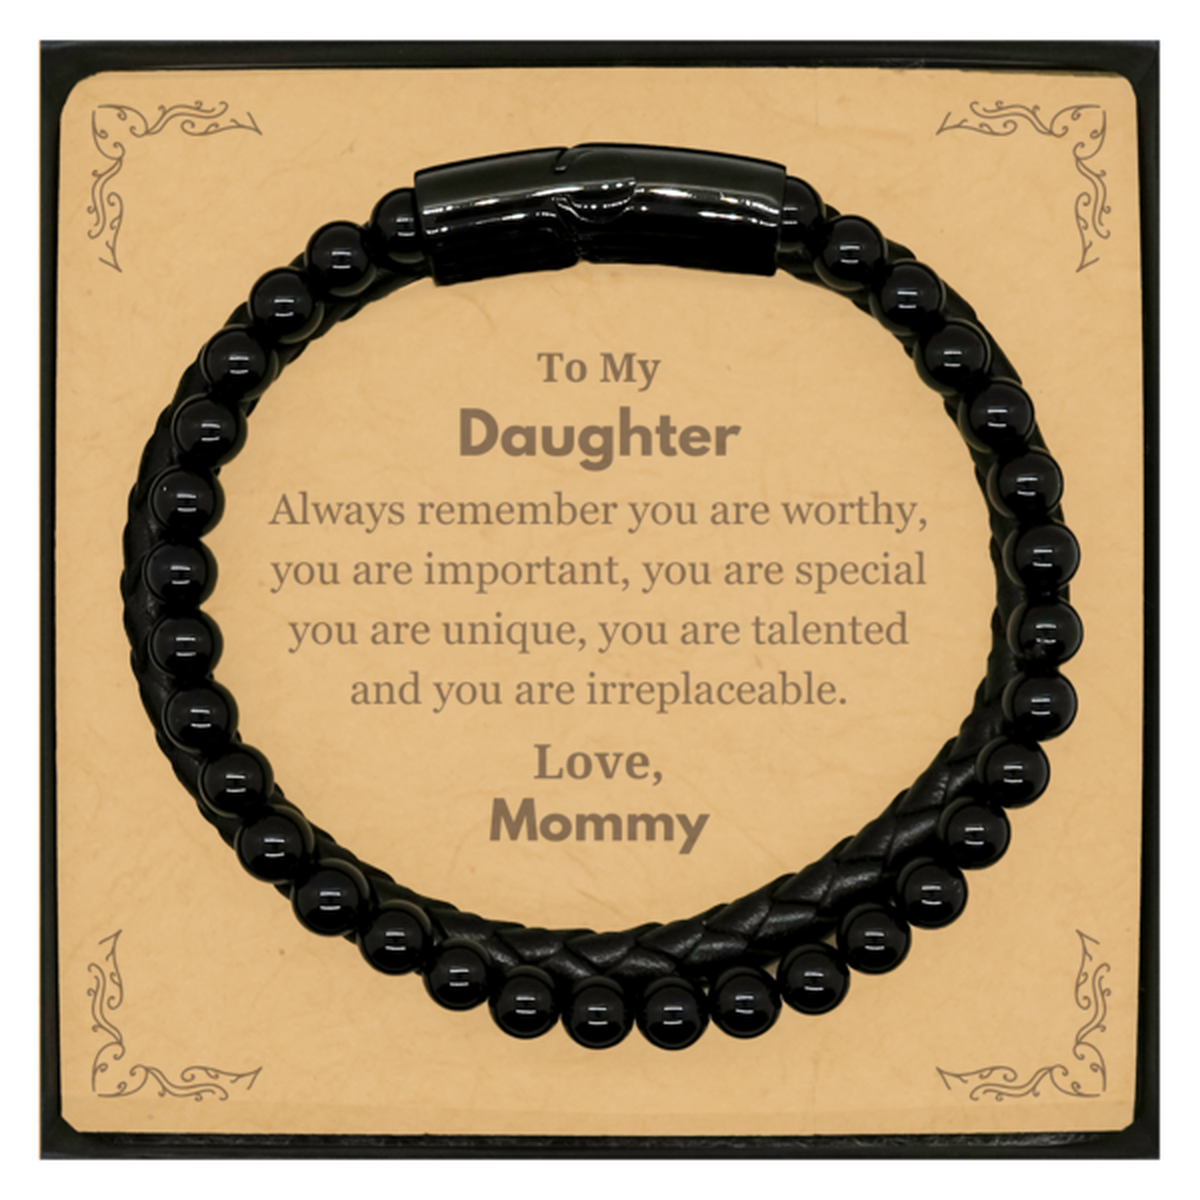 Daughter Birthday Gifts from Mommy, Inspirational Stone Leather Bracelets for Daughter Christmas Graduation Gifts for Daughter Always remember you are worthy, you are important. Love, Mommy